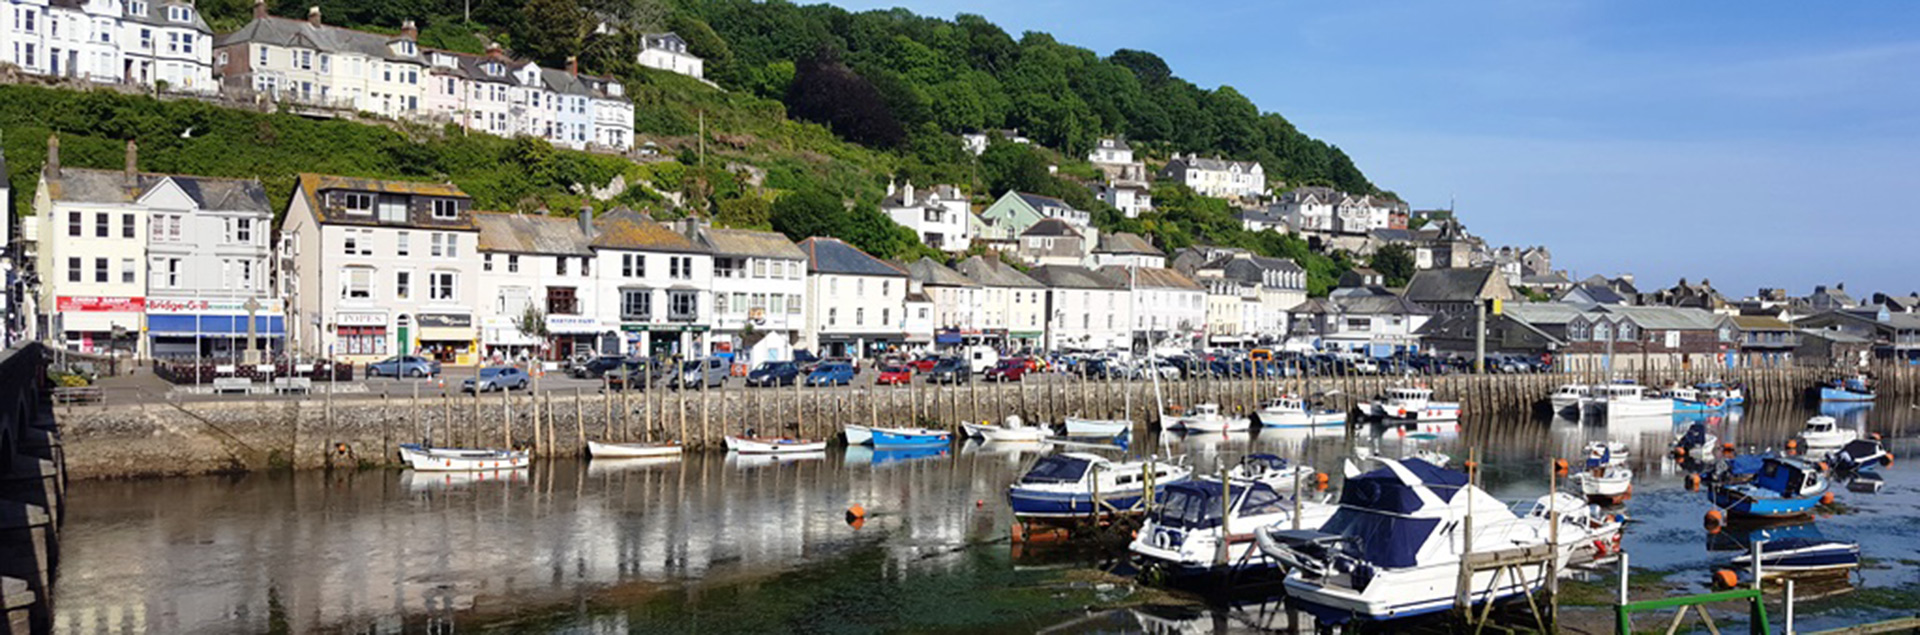 Things to do in Looe